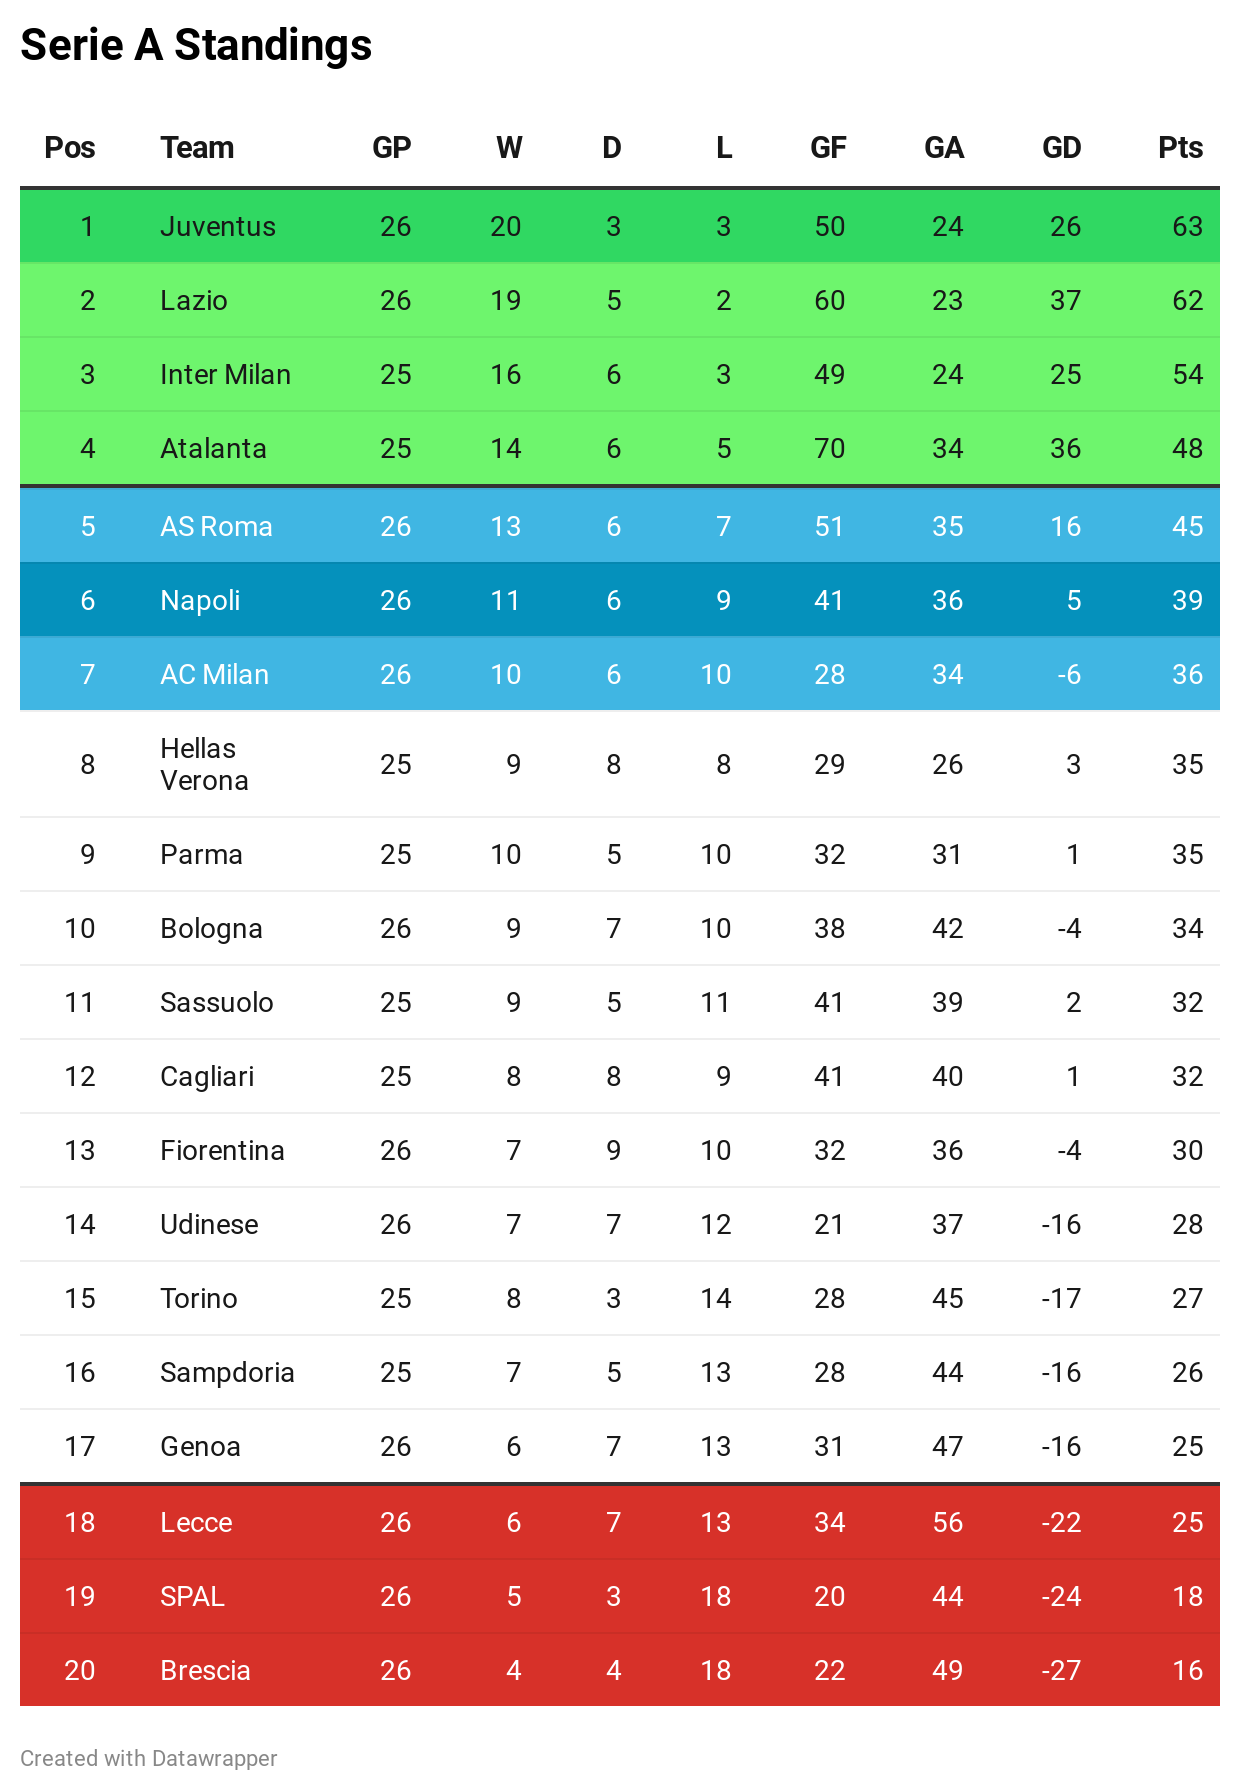 Serie A Standings 2019/20